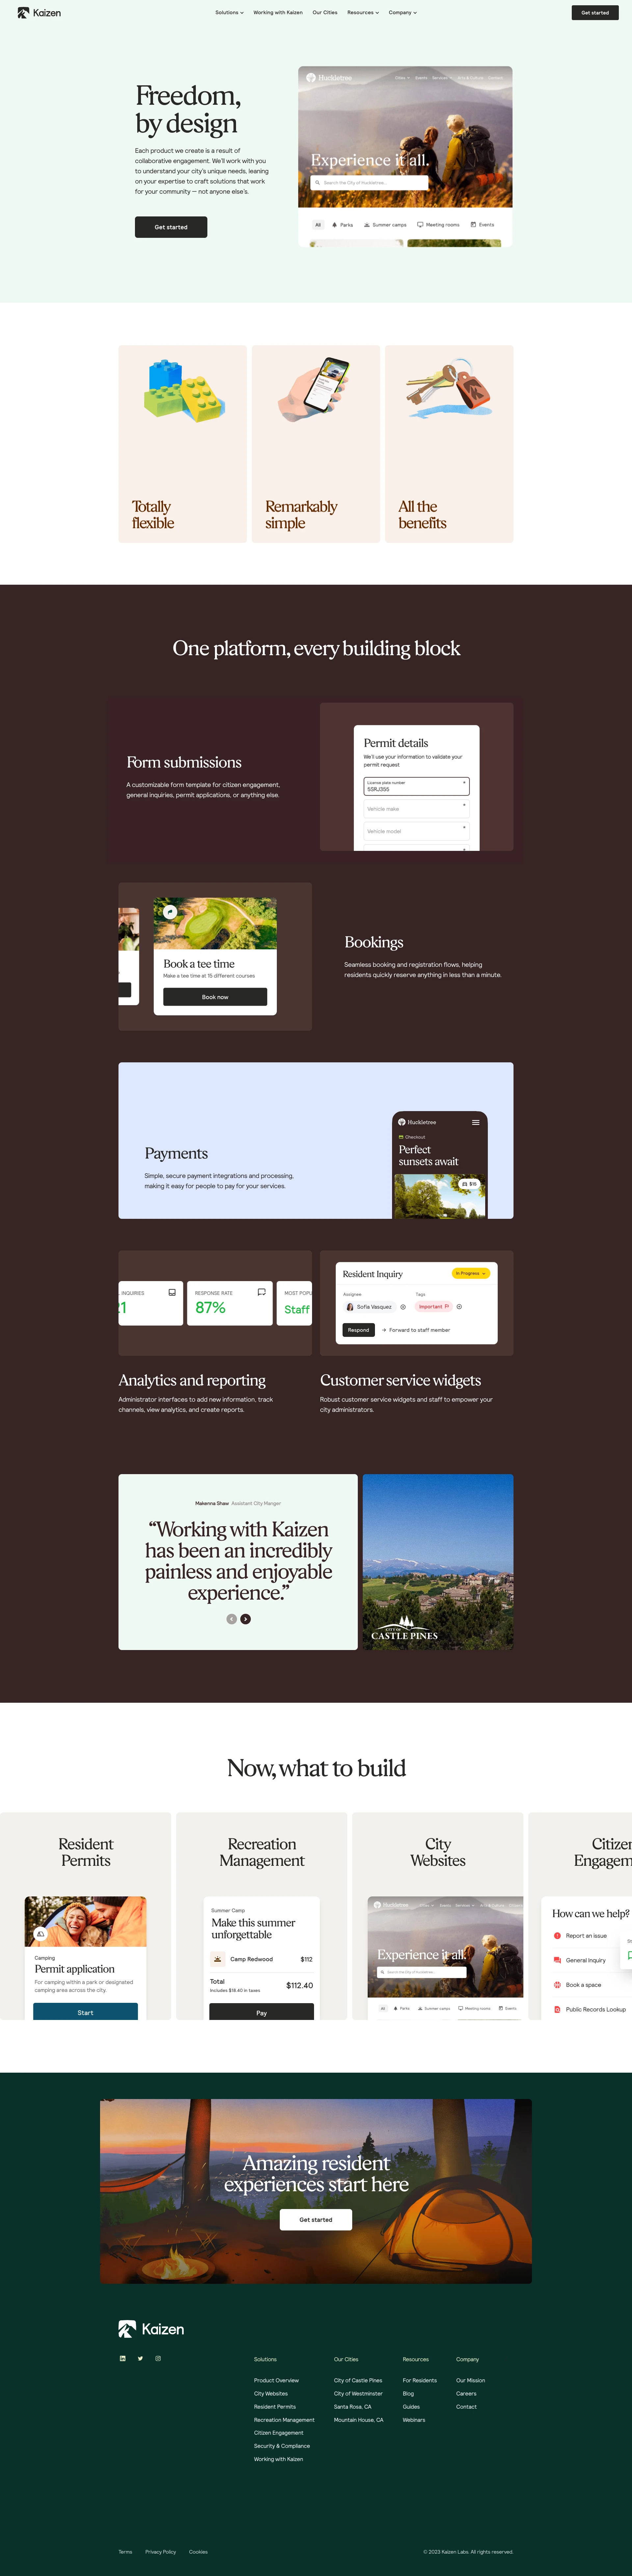 Kaizen Landing Page Example: Create digital worlds, let your communities thrive. Kaizen Labs helps city administrators transform resident experiences with simple digital products like websites, resident permitting, and recreation management.